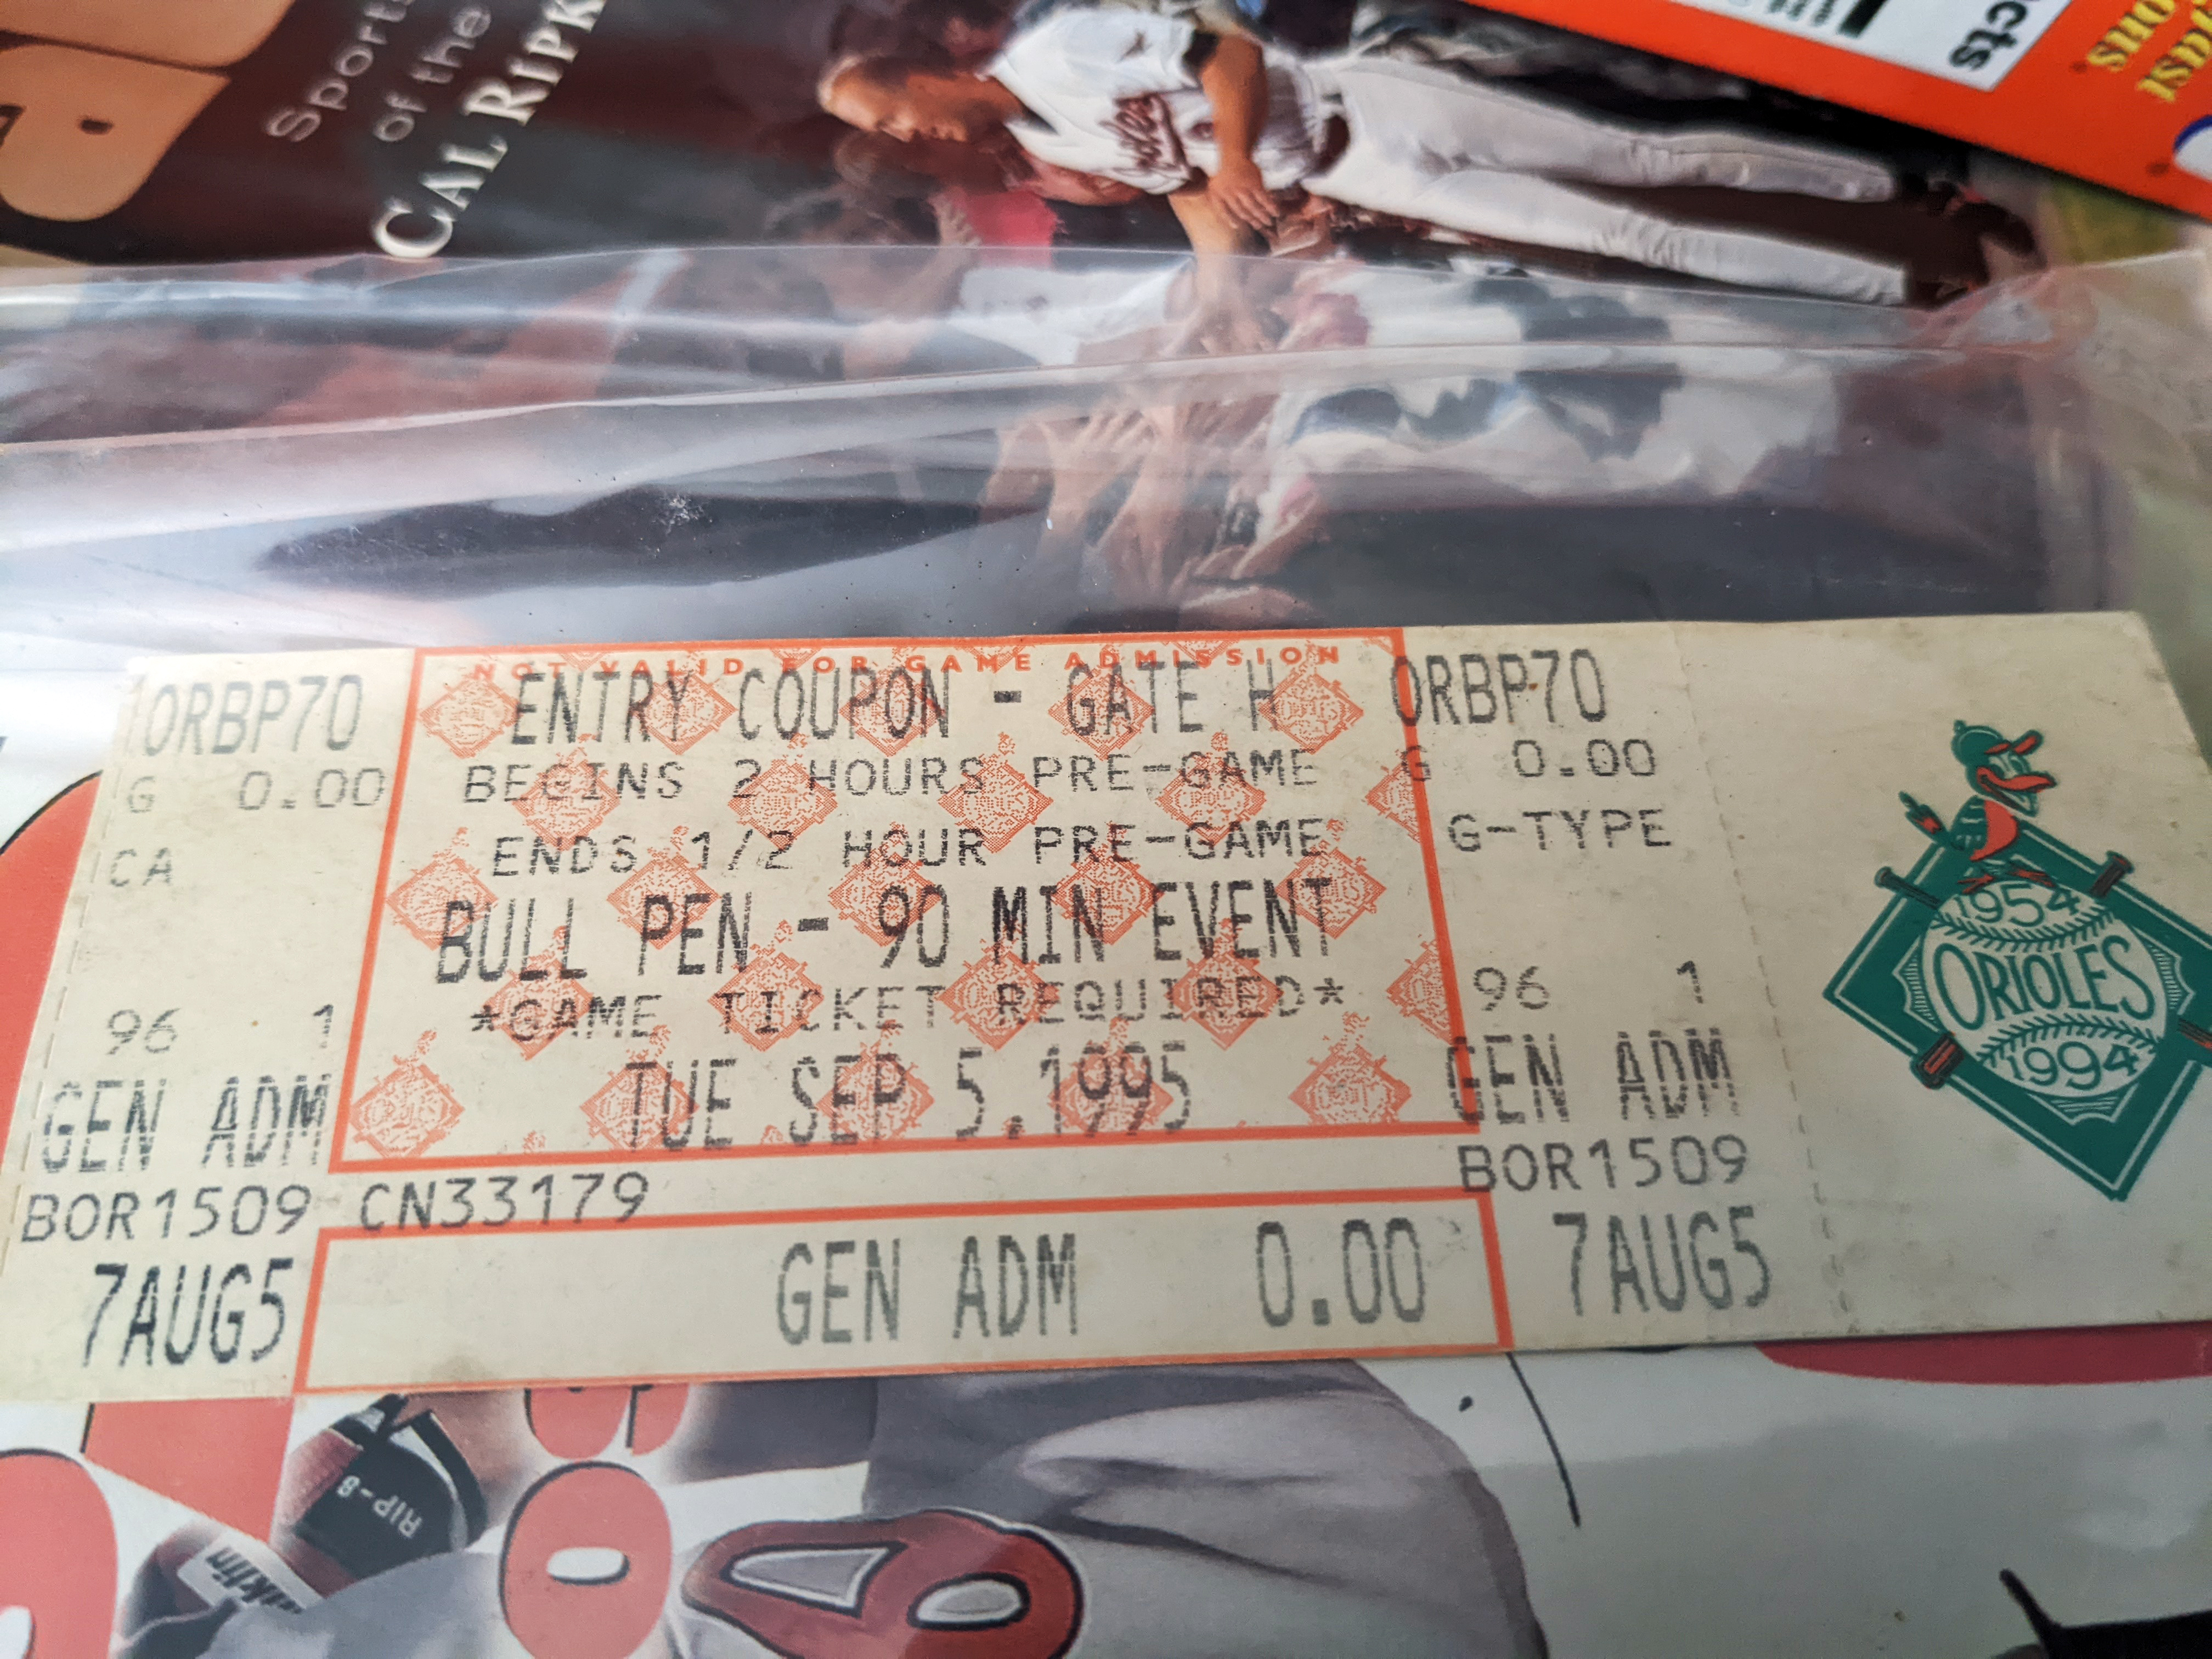 For 30th anniversary of Camden Yards, Orioles throw back ticket pricing to  1992 levels for first two series